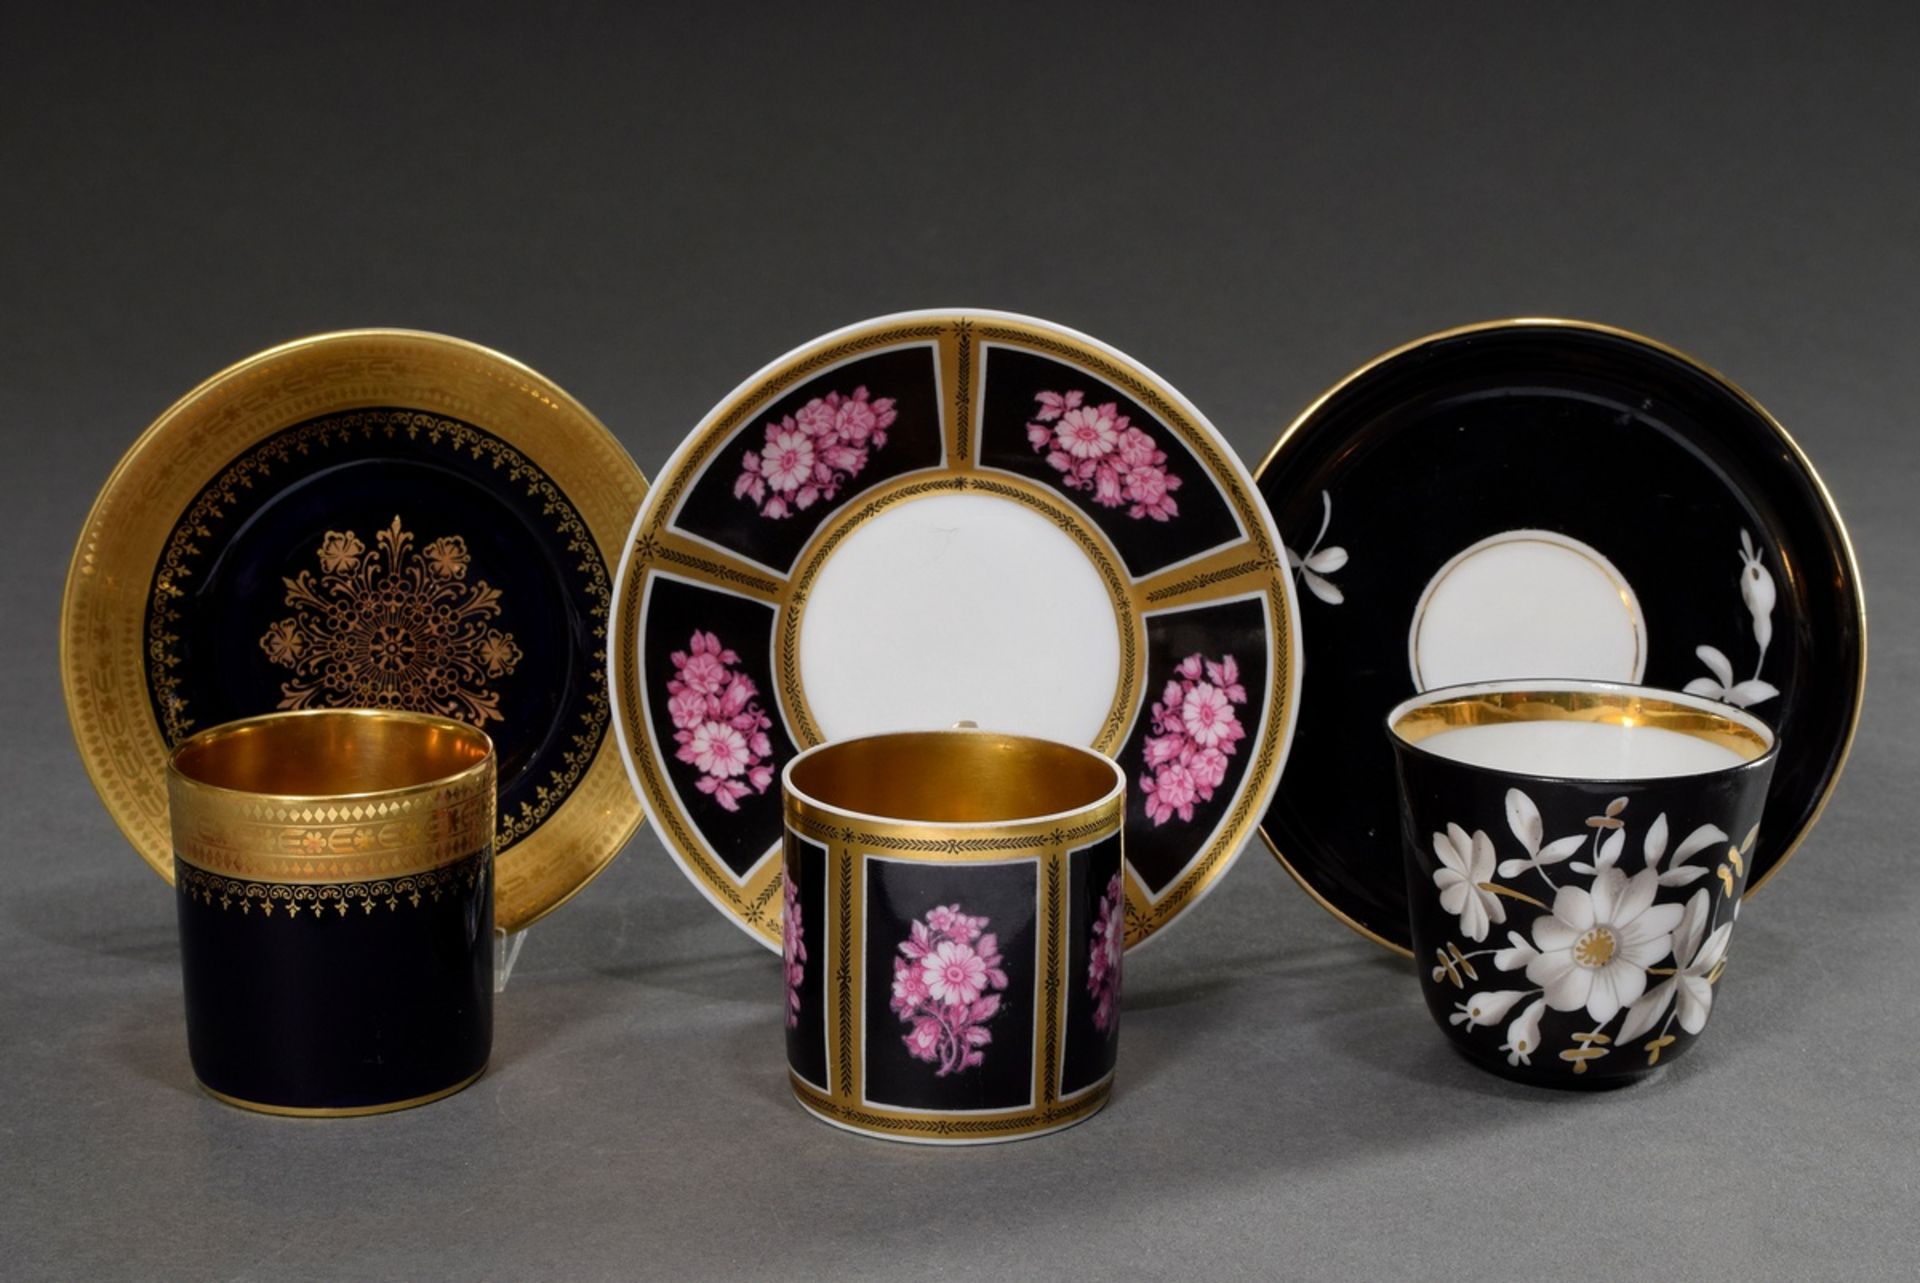 3 Various porcelain mocca cups/saucers with different floral and ornamental gold decorations on a b